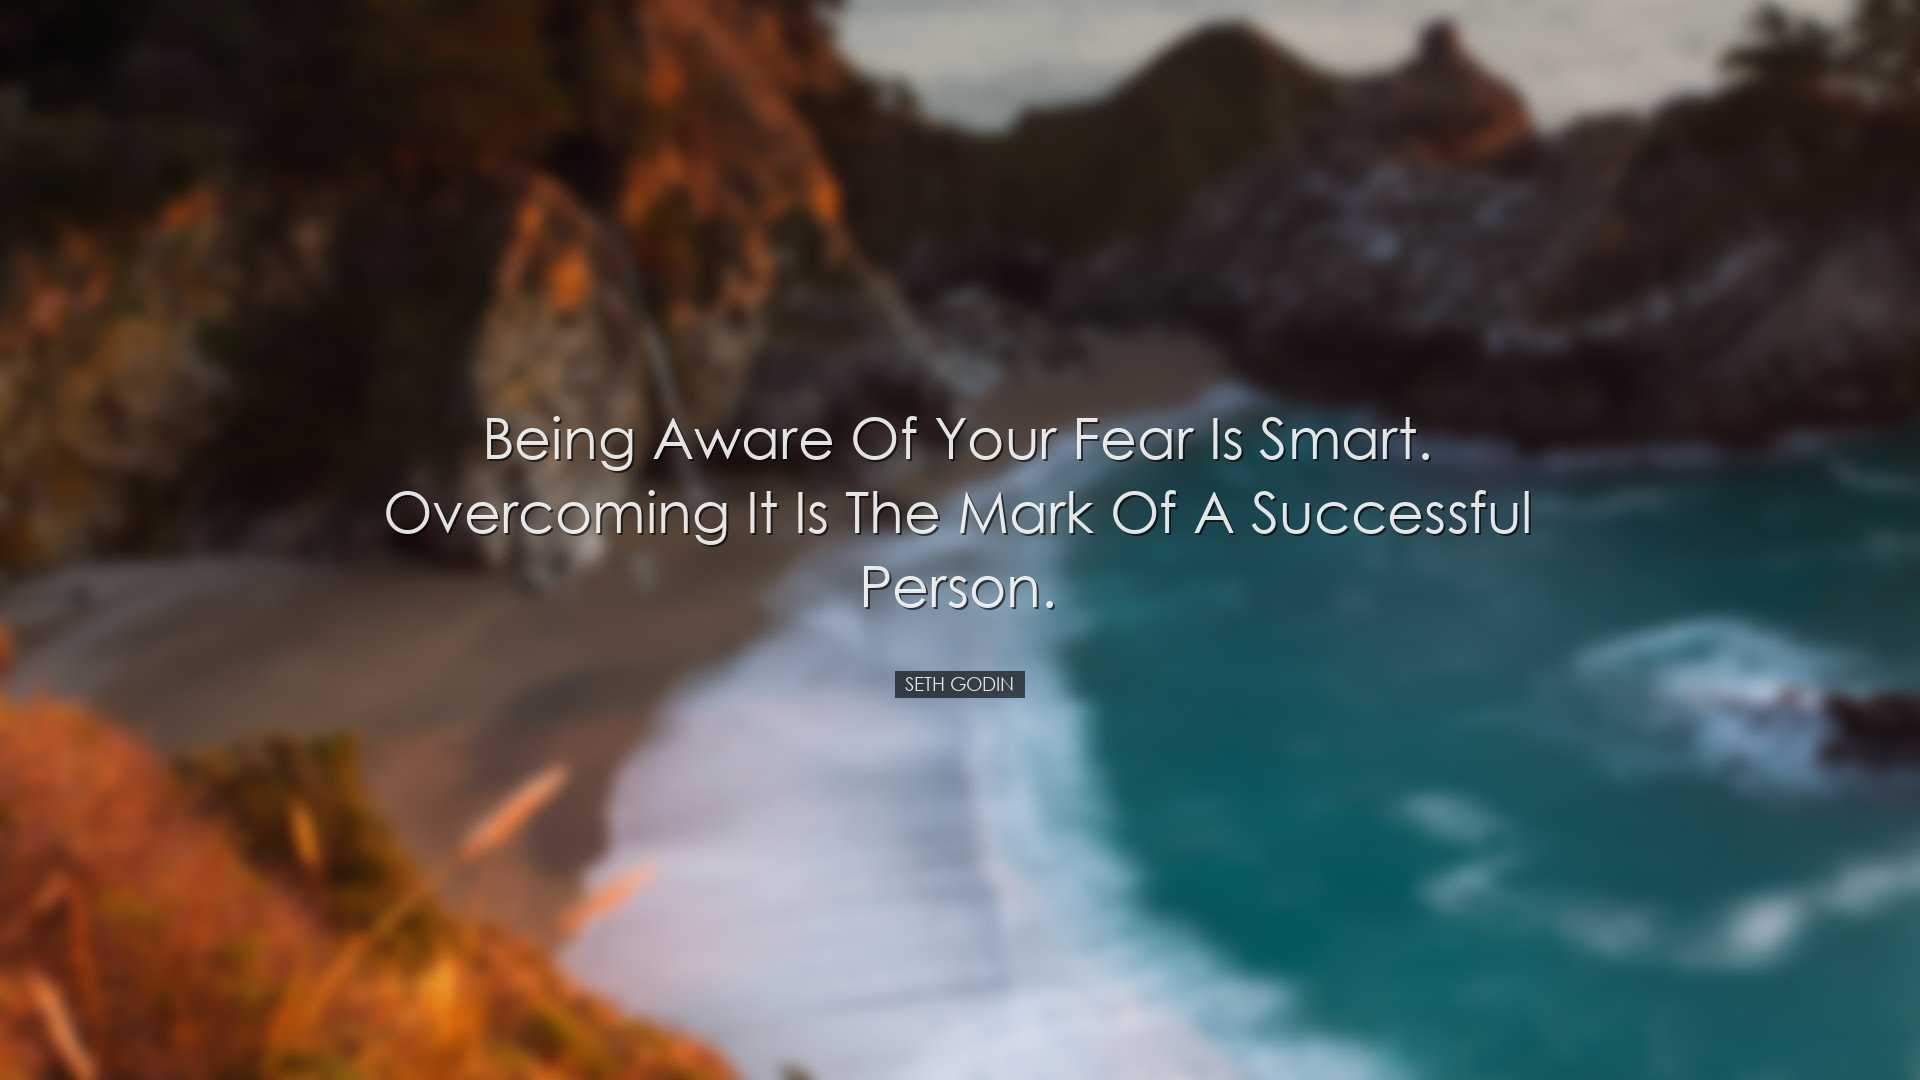 Being aware of your fear is smart. Overcoming it is the mark of a